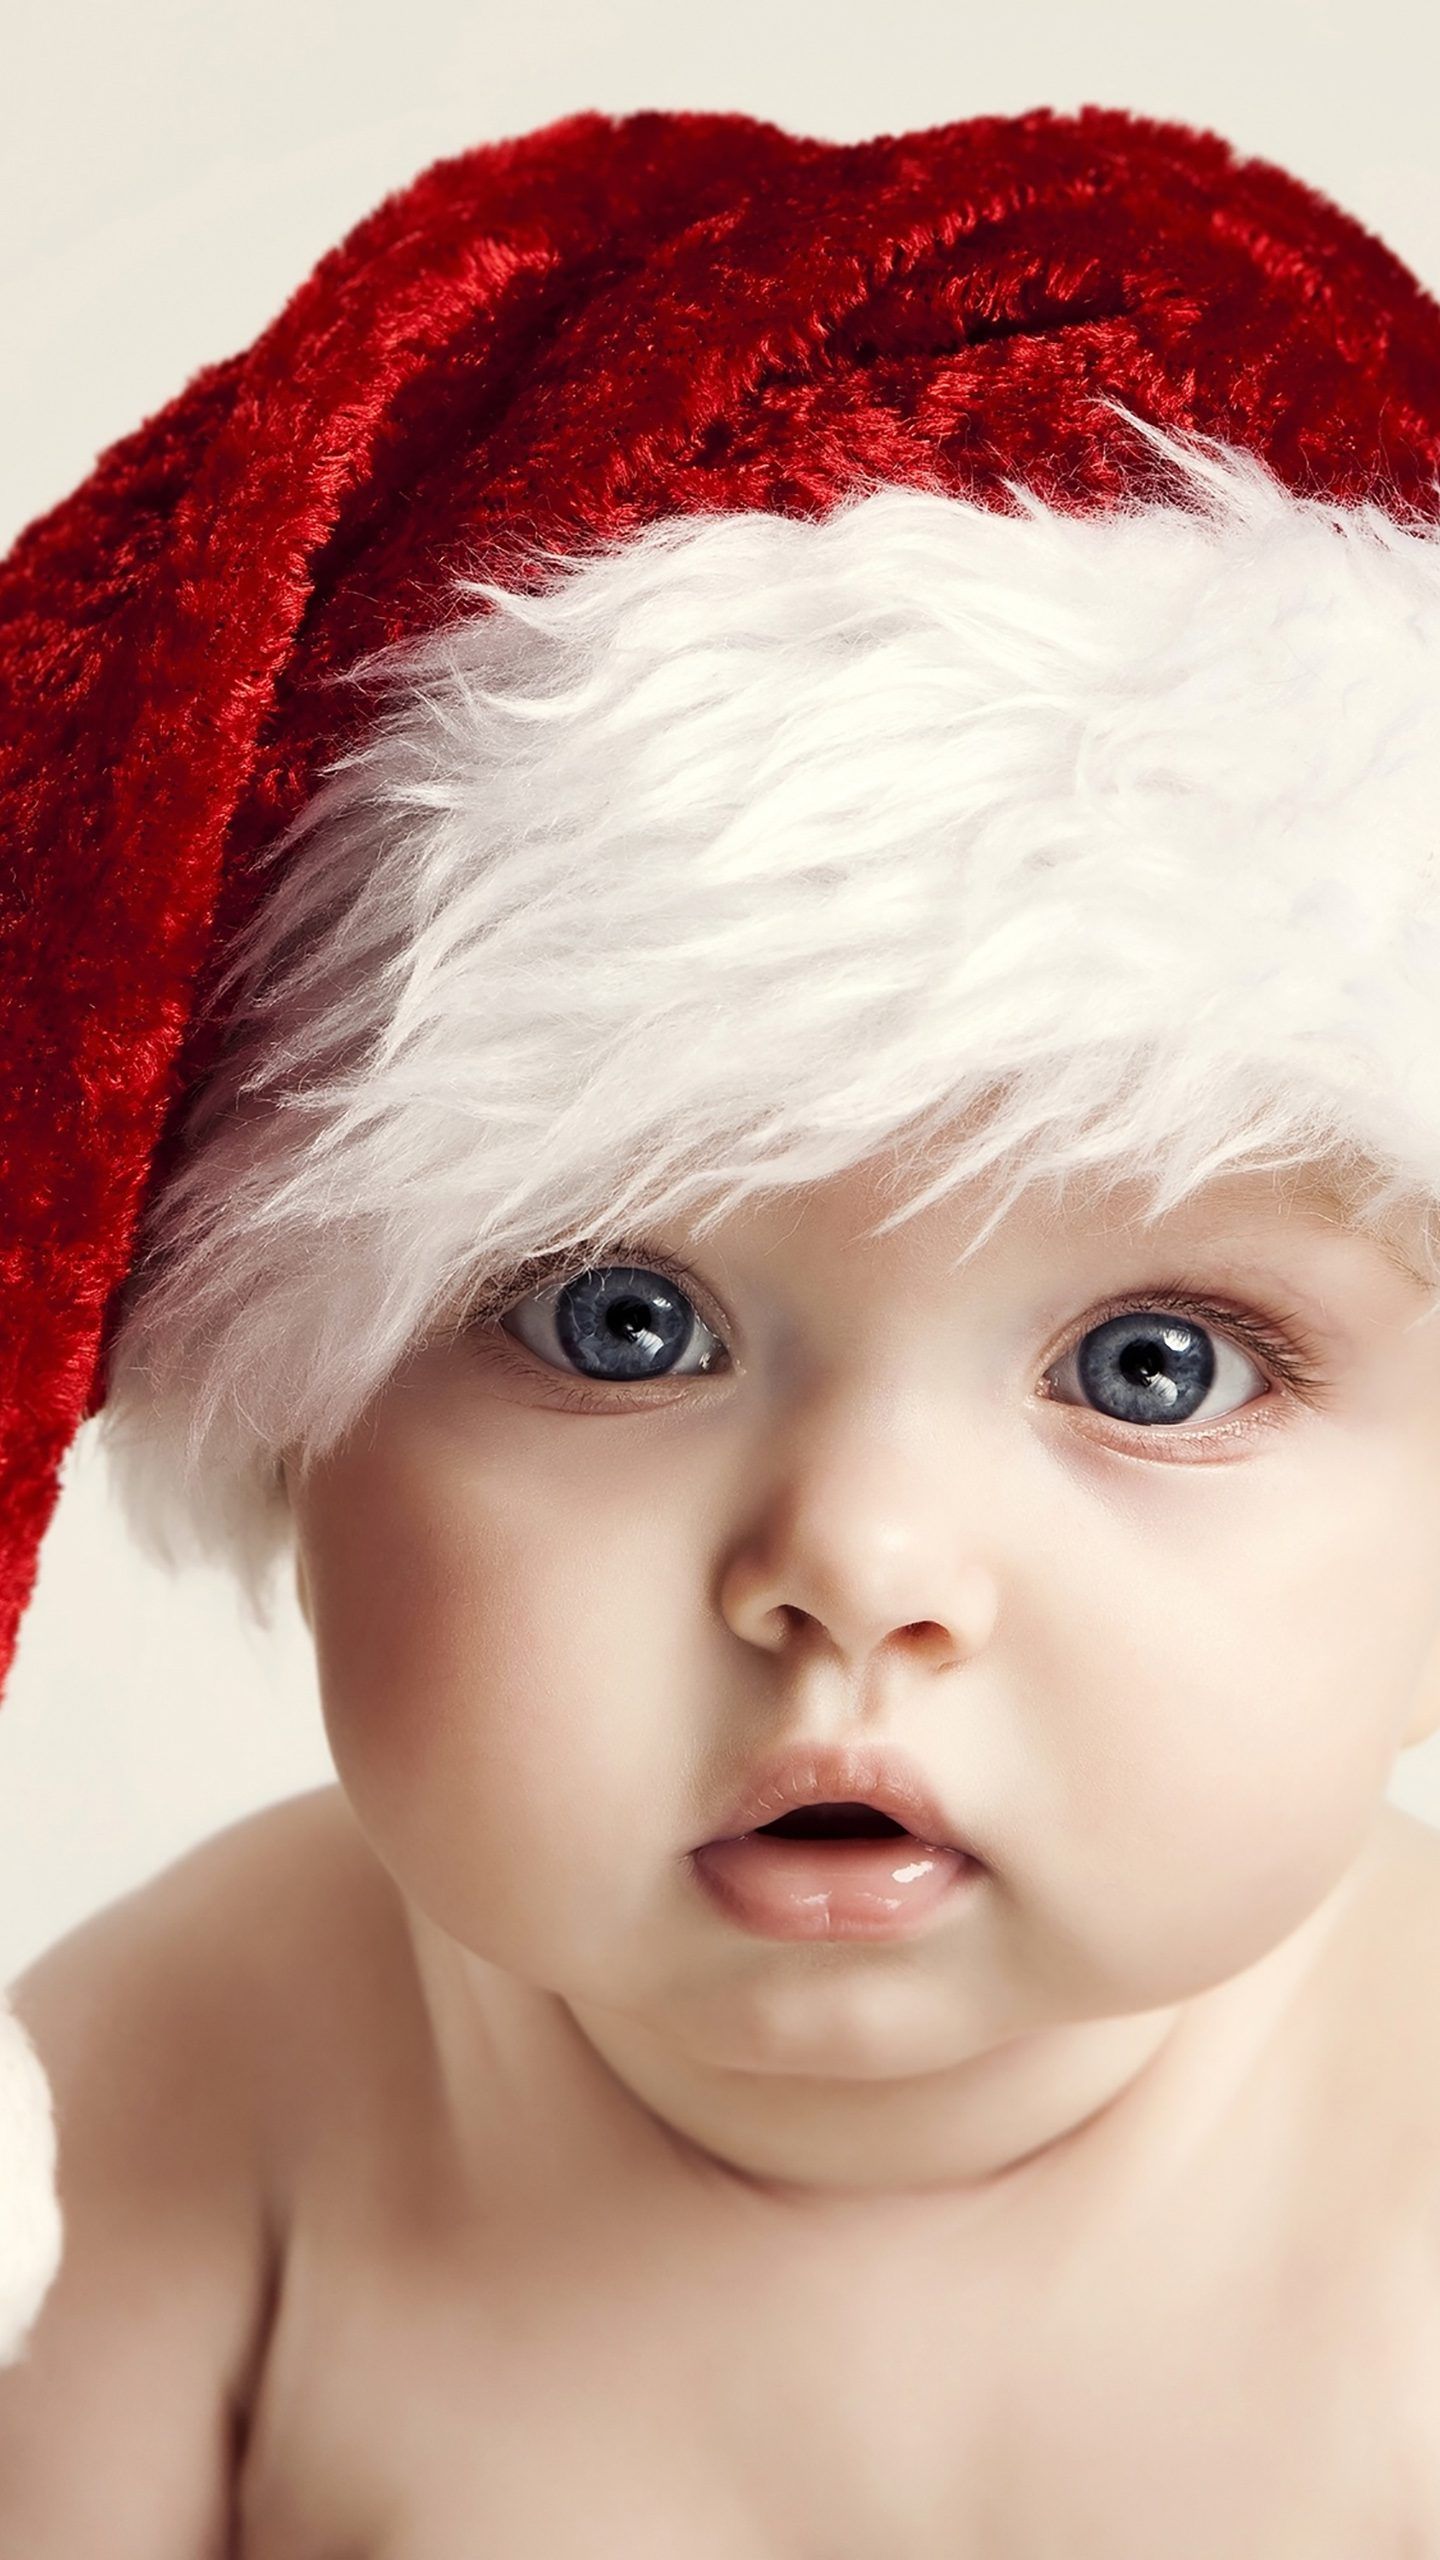 Cute Baby Kid Child Christmas Red Hat 4K Wallpaper